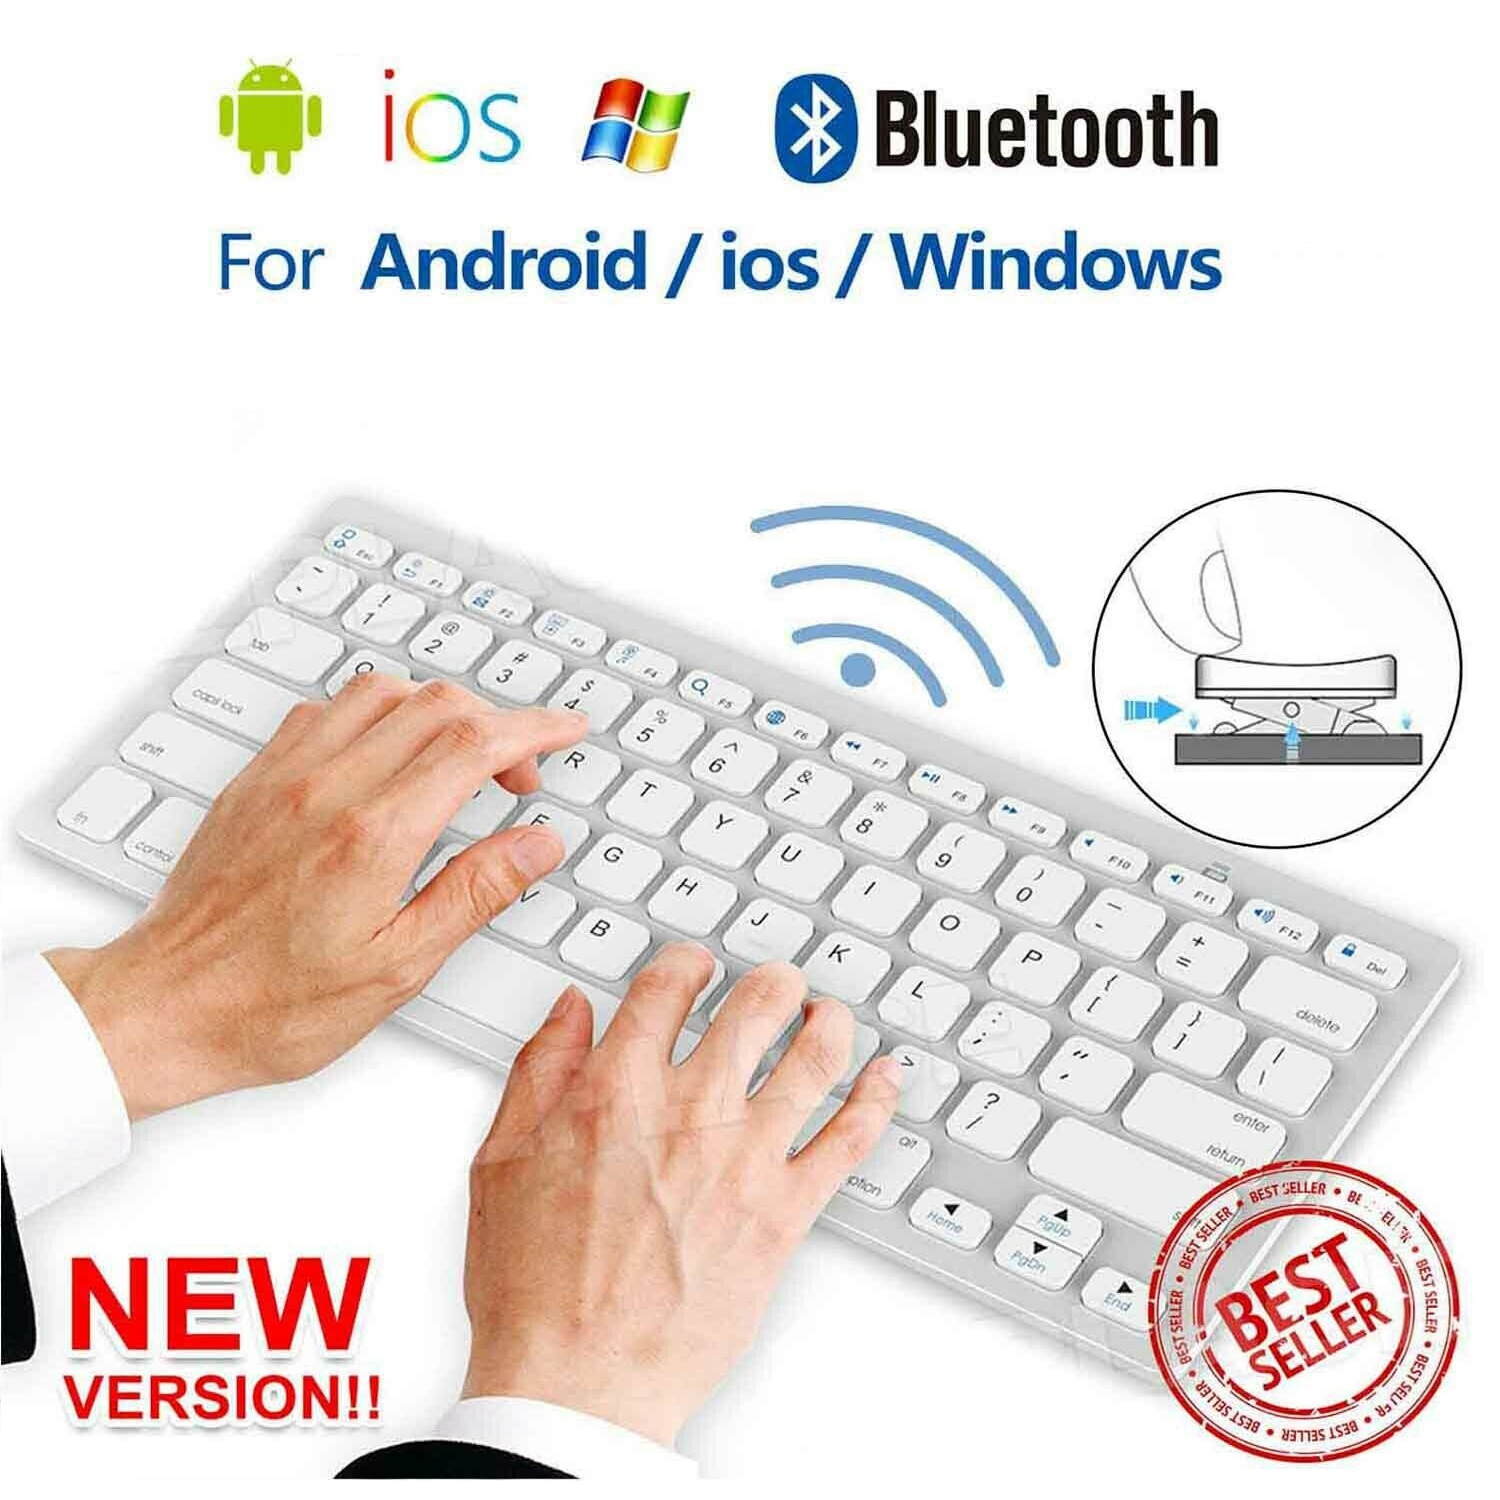 Wireless Multi-Device Keyboard for Windows, iOS Android or Chrome, Wireless Bluetooth, Compact Space-Saving Design, PC/Mac/Laptop/Smartphone/Tablet- White